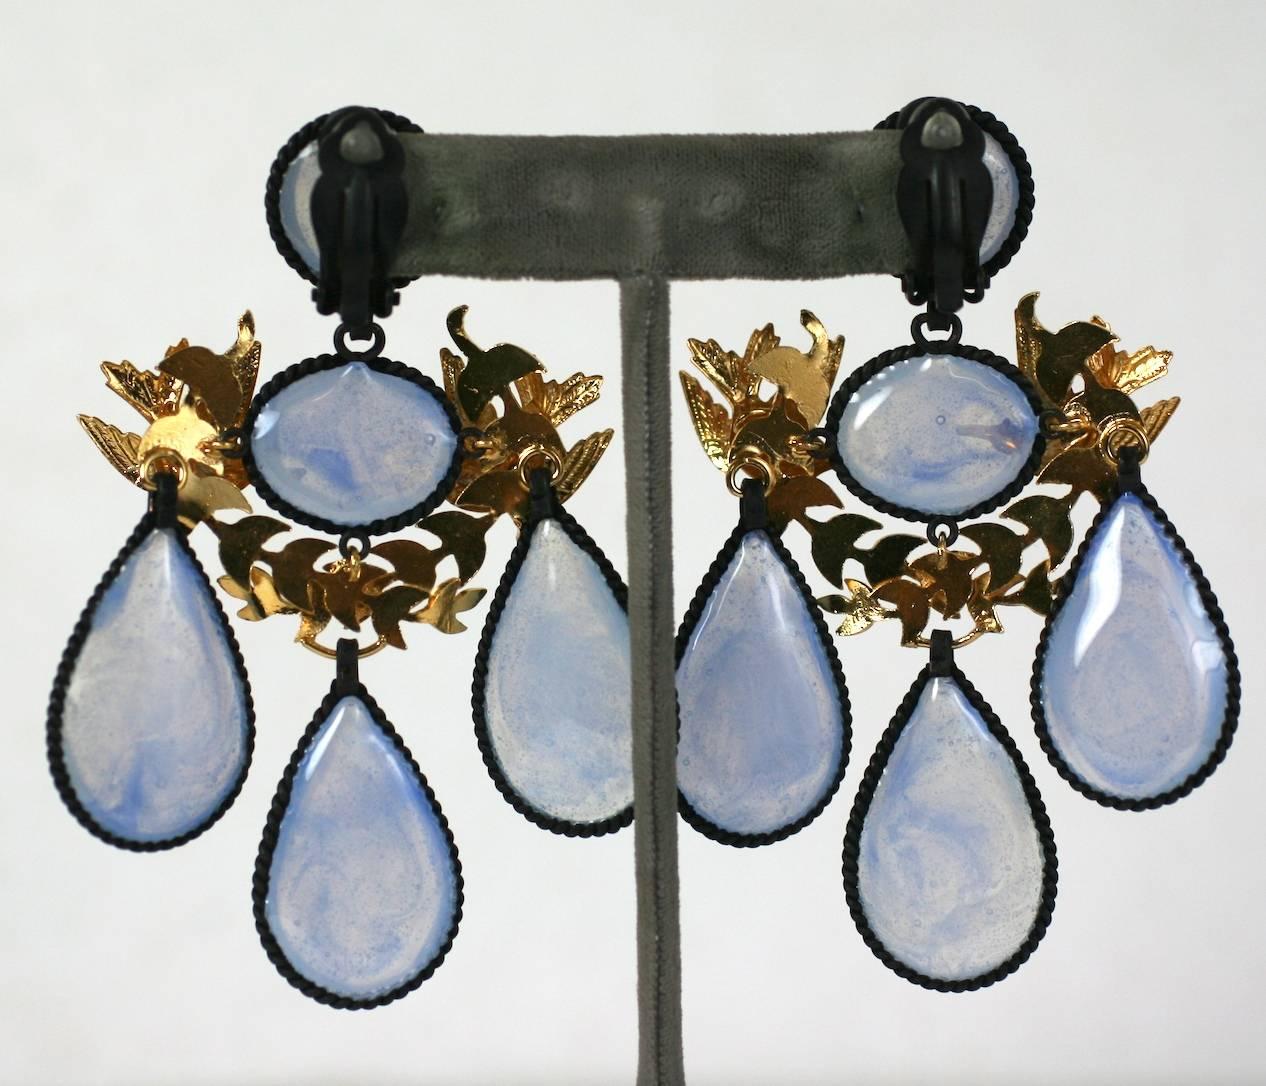 Oversized Girandole Garland Earrings handmade in the Parisian studios of  MWLC. An late 18th century classic form reworked in blackened and gilt metal with opaline blue pate de verre poured glass. A garland of gilt songbirds completes the 